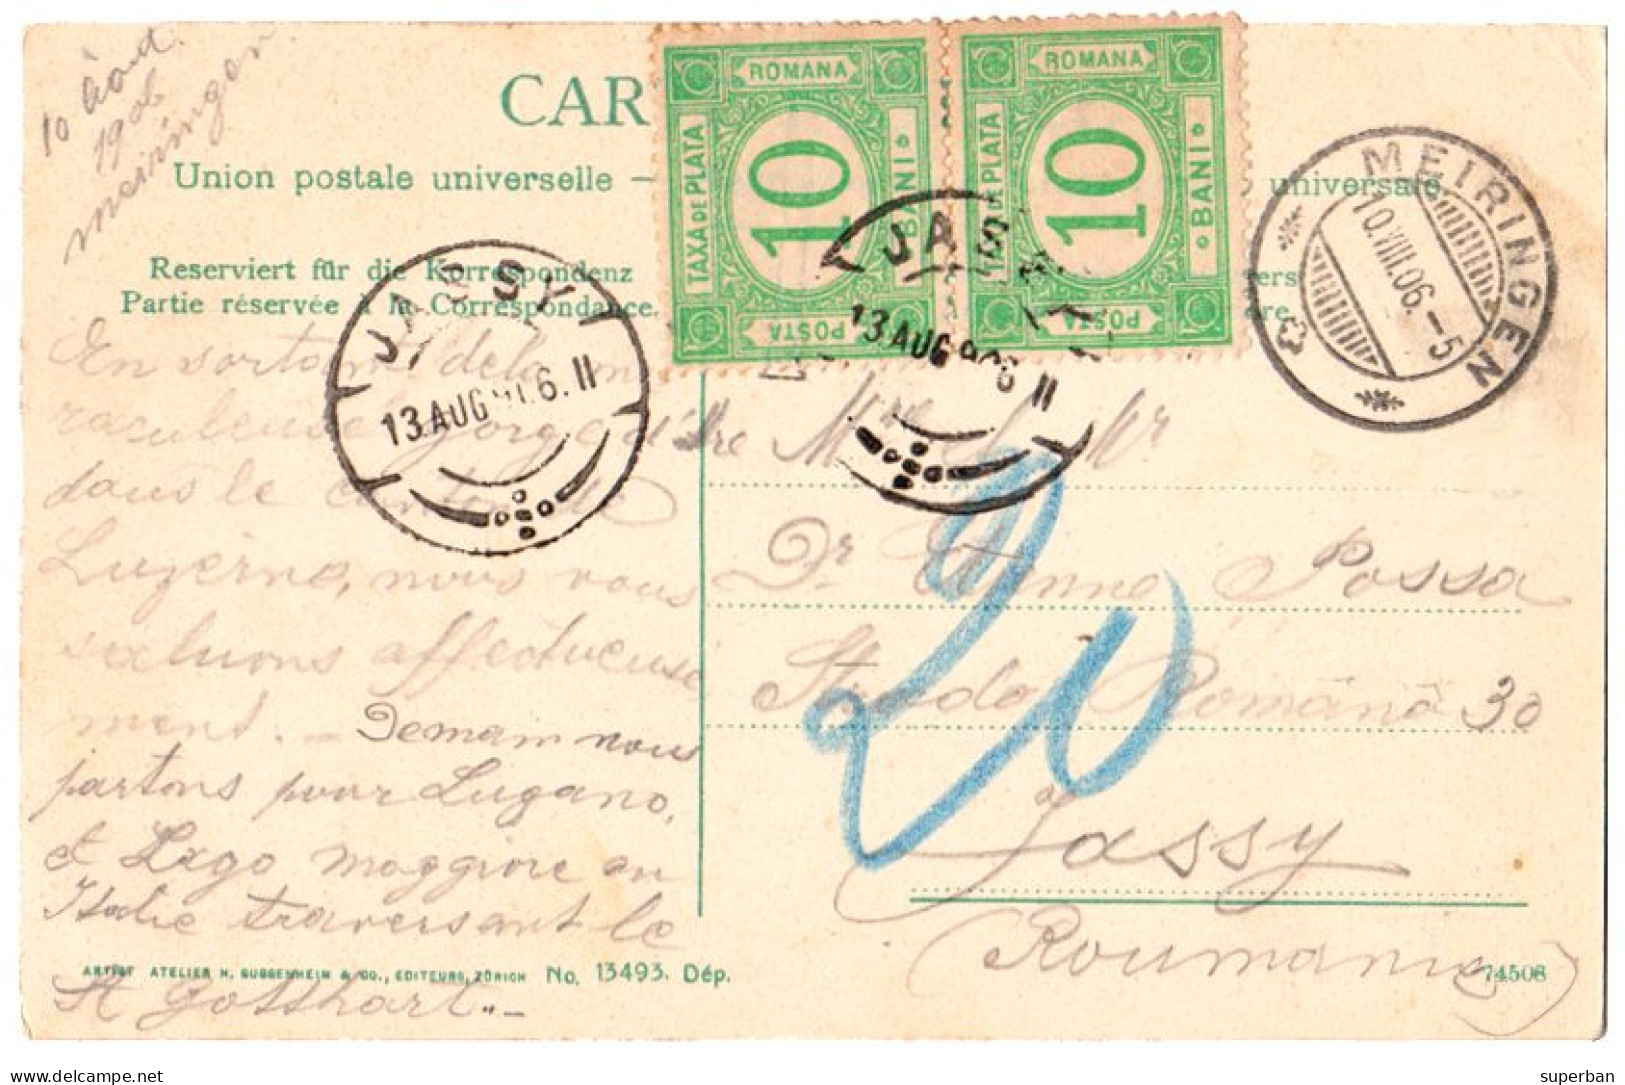 ROMANIA : IASI / JASSY - BEL AFFRANCHISSEMENT TAXE / NICE TAX FRANKING  : TAXA DE PLATA - PAIR Of 2 STAMPS - 1906 (an735 - Lettres & Documents